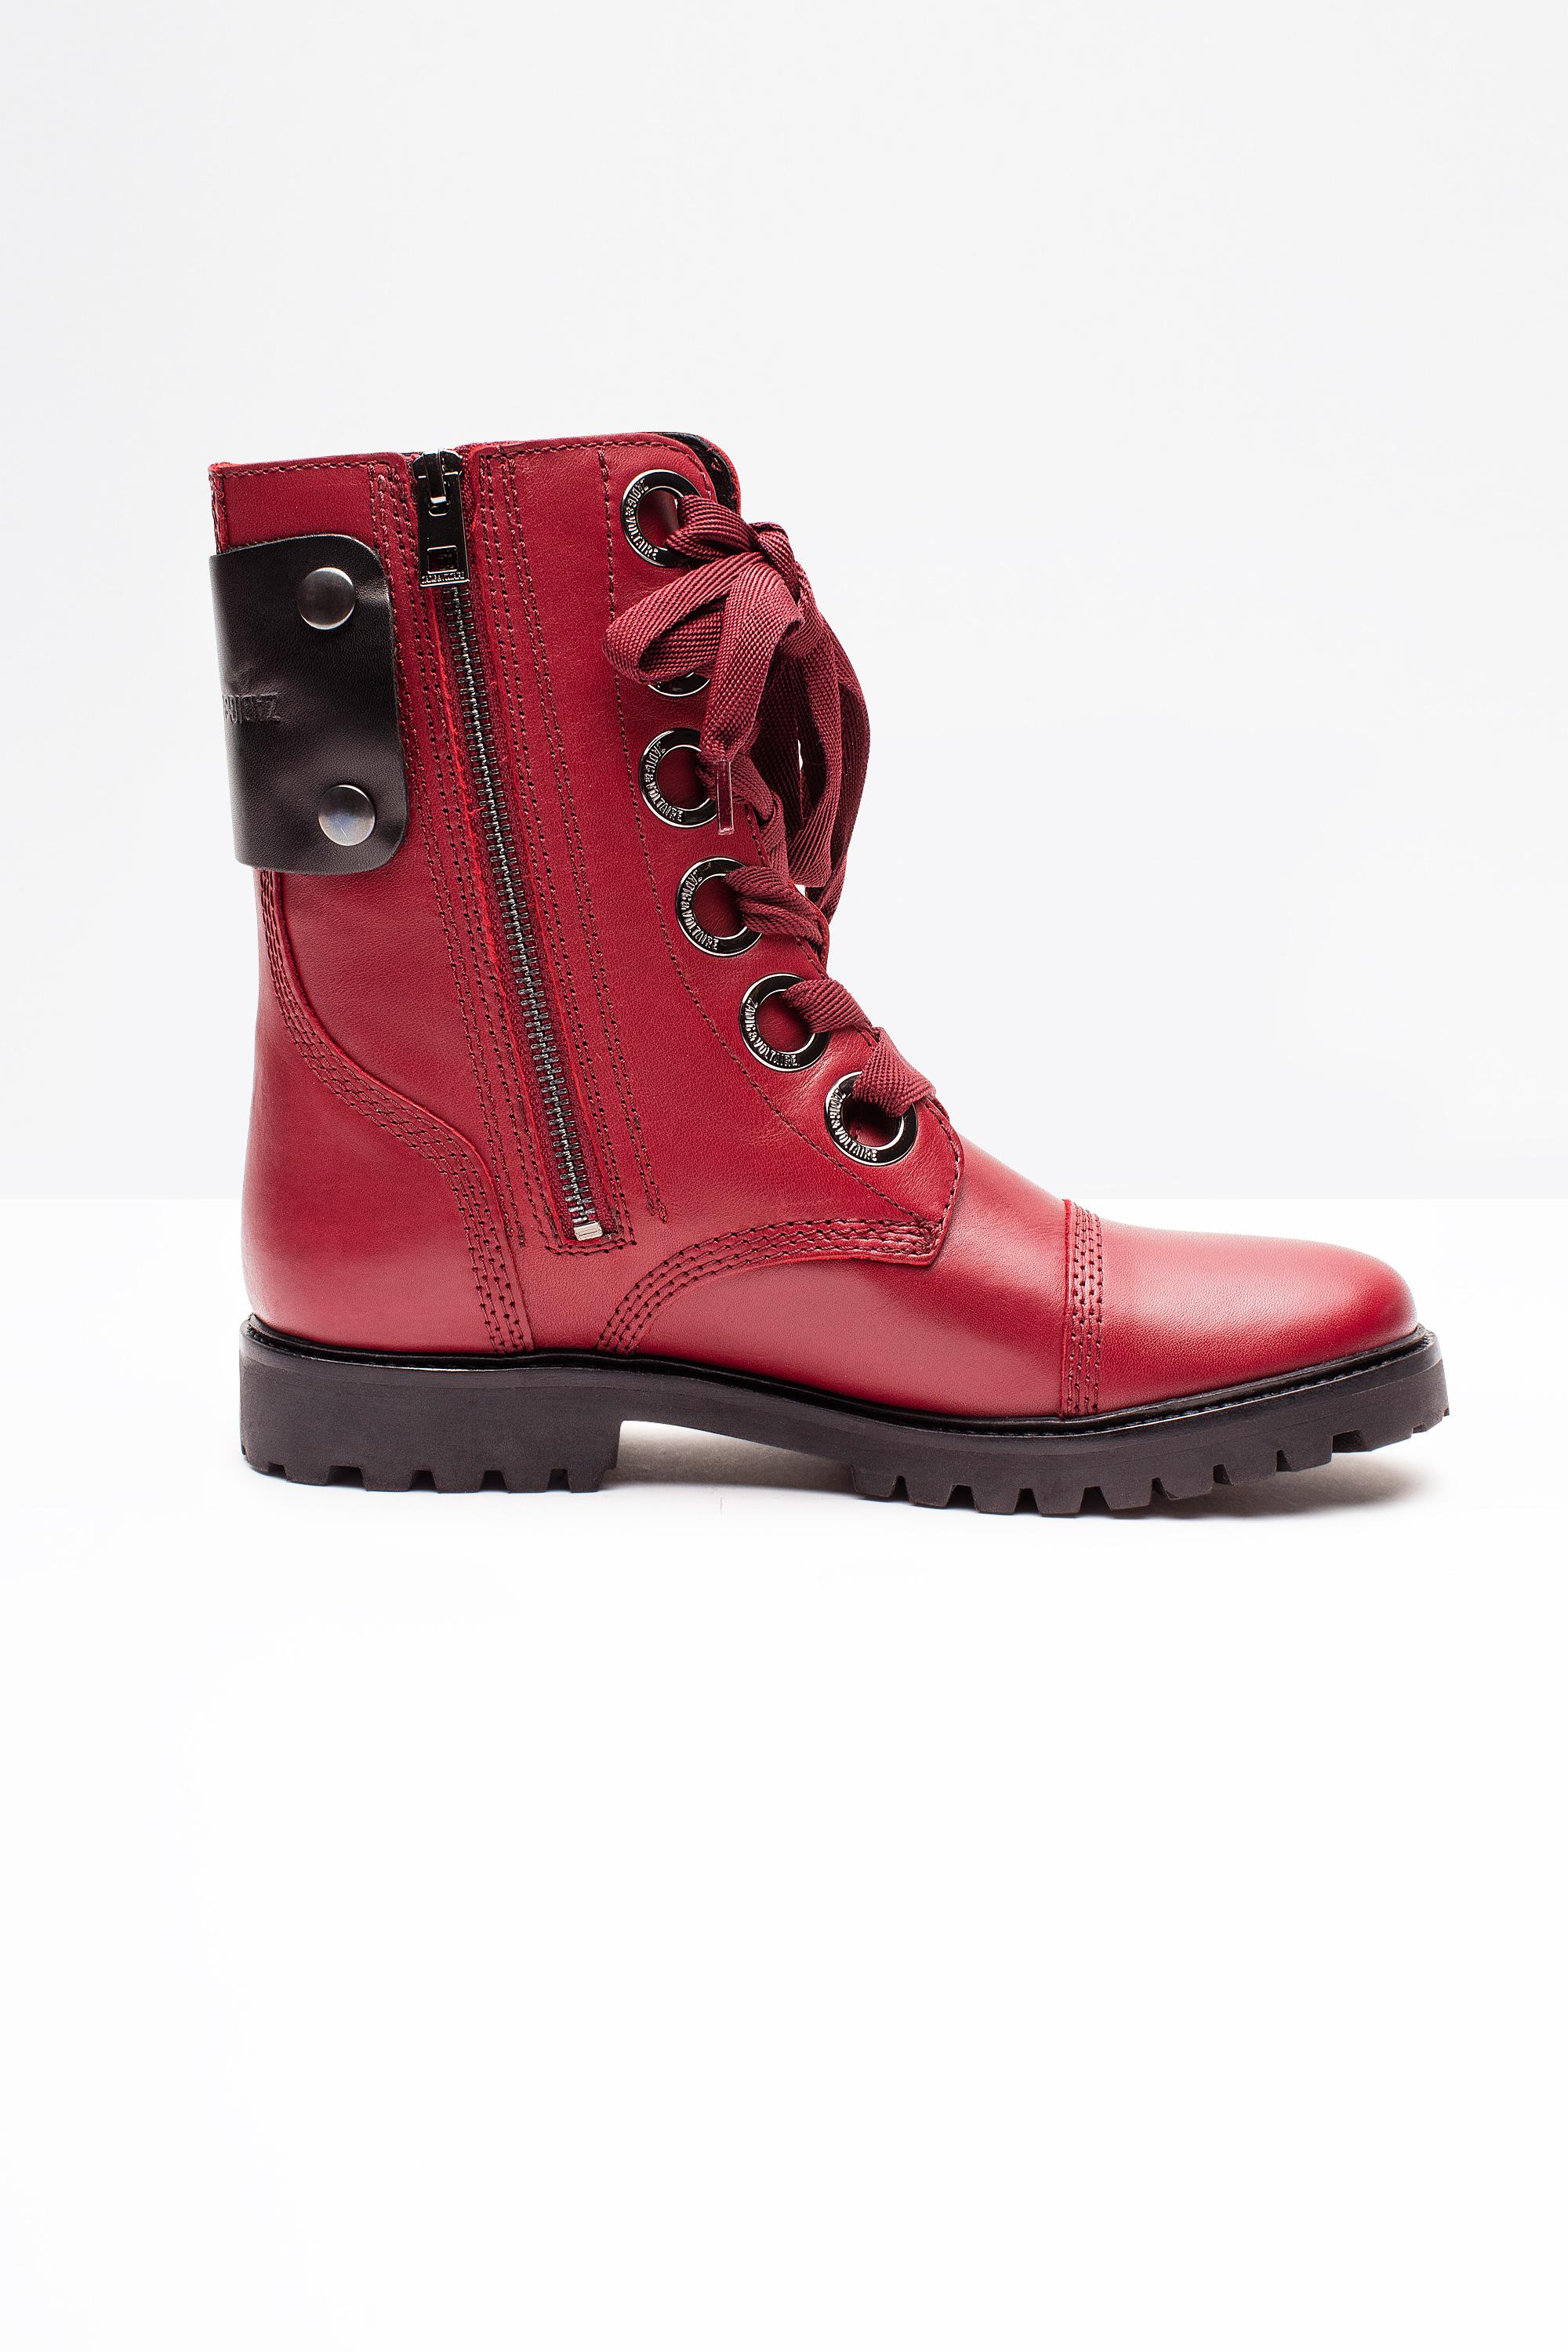 Zadig & Voltaire Women's Joe Leather Lace Up Combat Booties in Red | Lyst